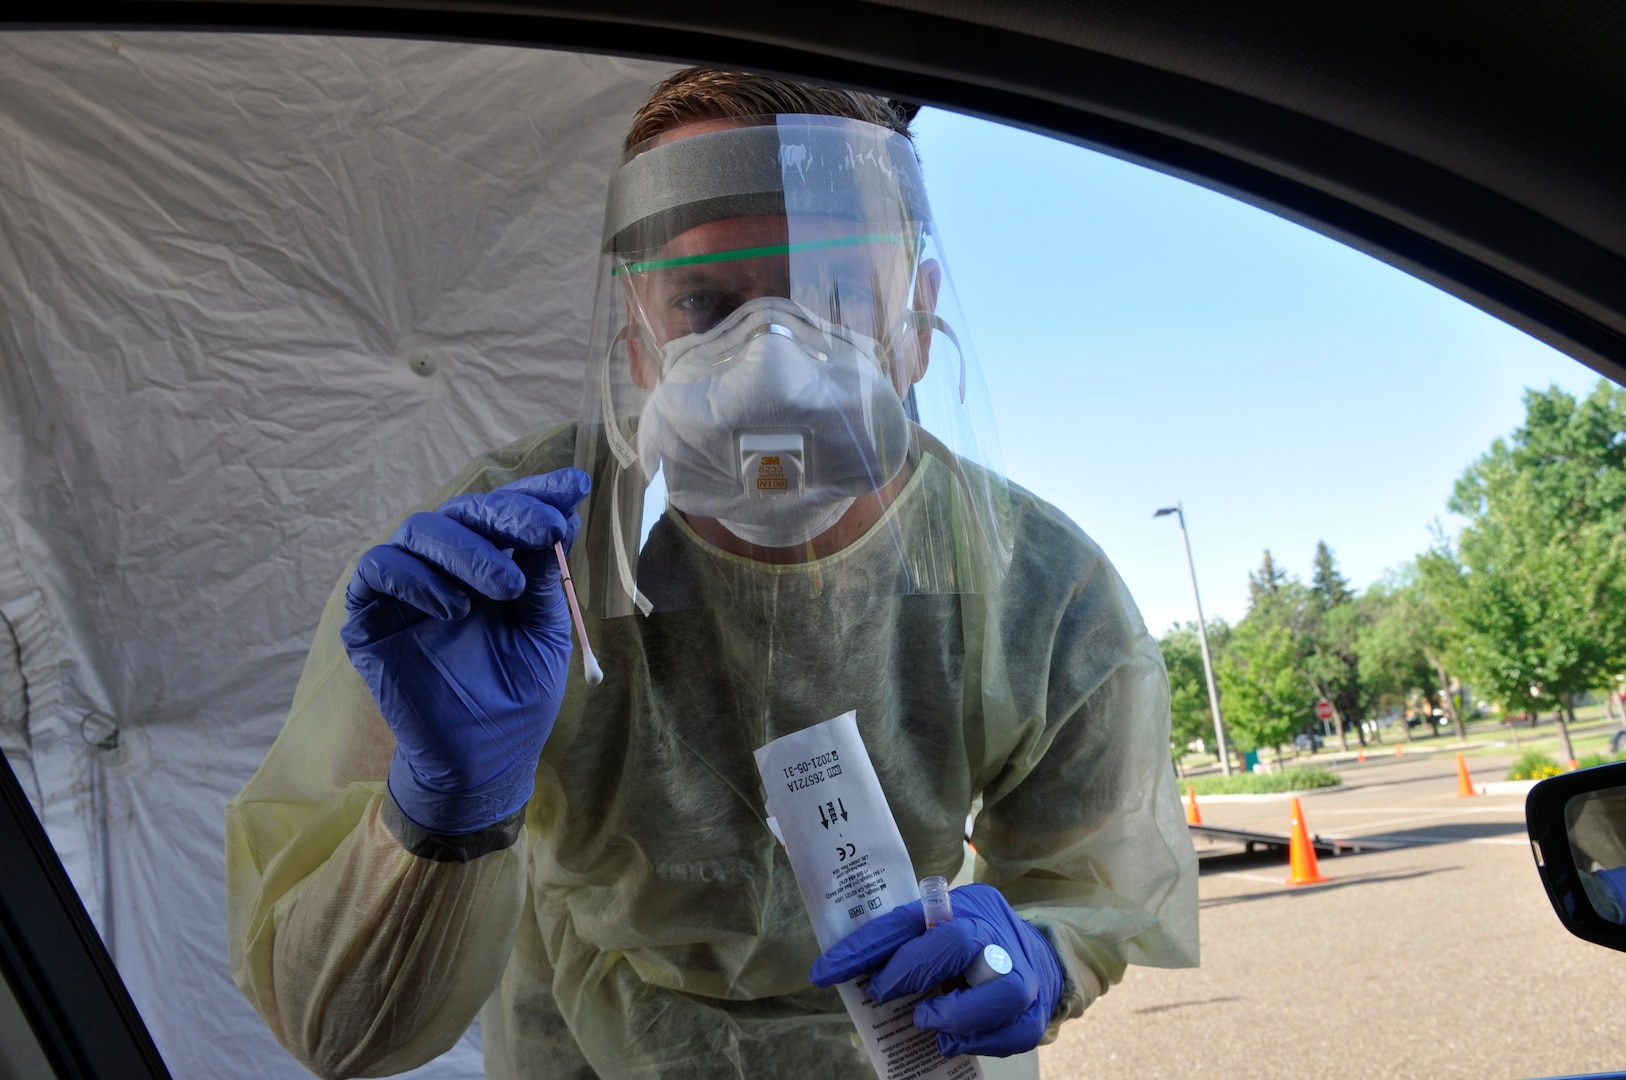 Spc. Collin Ahmann, North Dakota Army National Guard Medical Detachment, prepares to collect a COVID-19 test specimen at the North Dakota state capitol in Bismarck July 6, 2021. The Guard has supported the state's response to the pandemic since March 16, 2020.